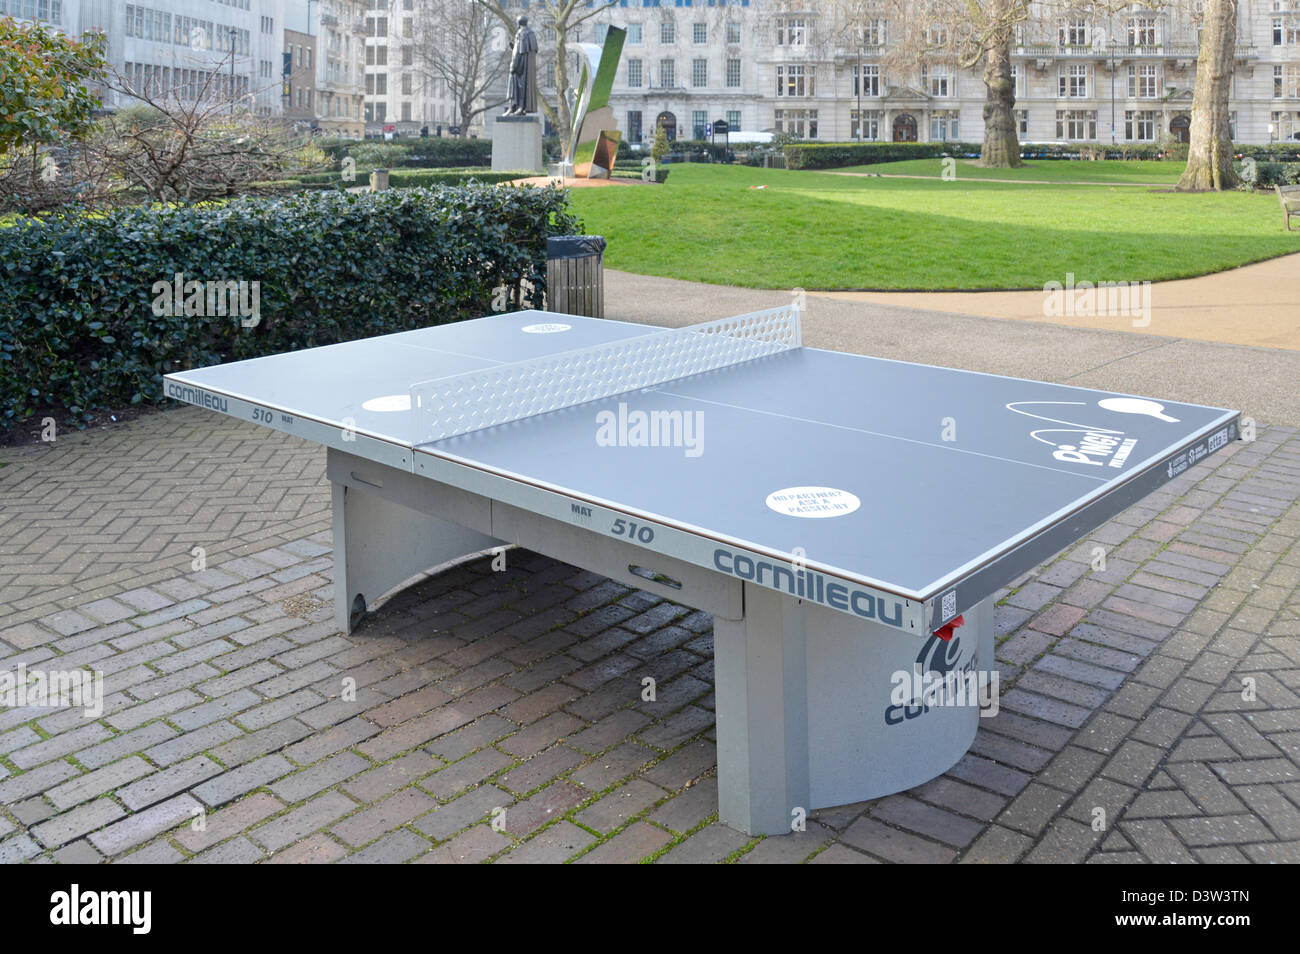 Cornilleau ping pong table tennis table installed in public gardens  Cavandish Square West End London England UK Stock Photo - Alamy